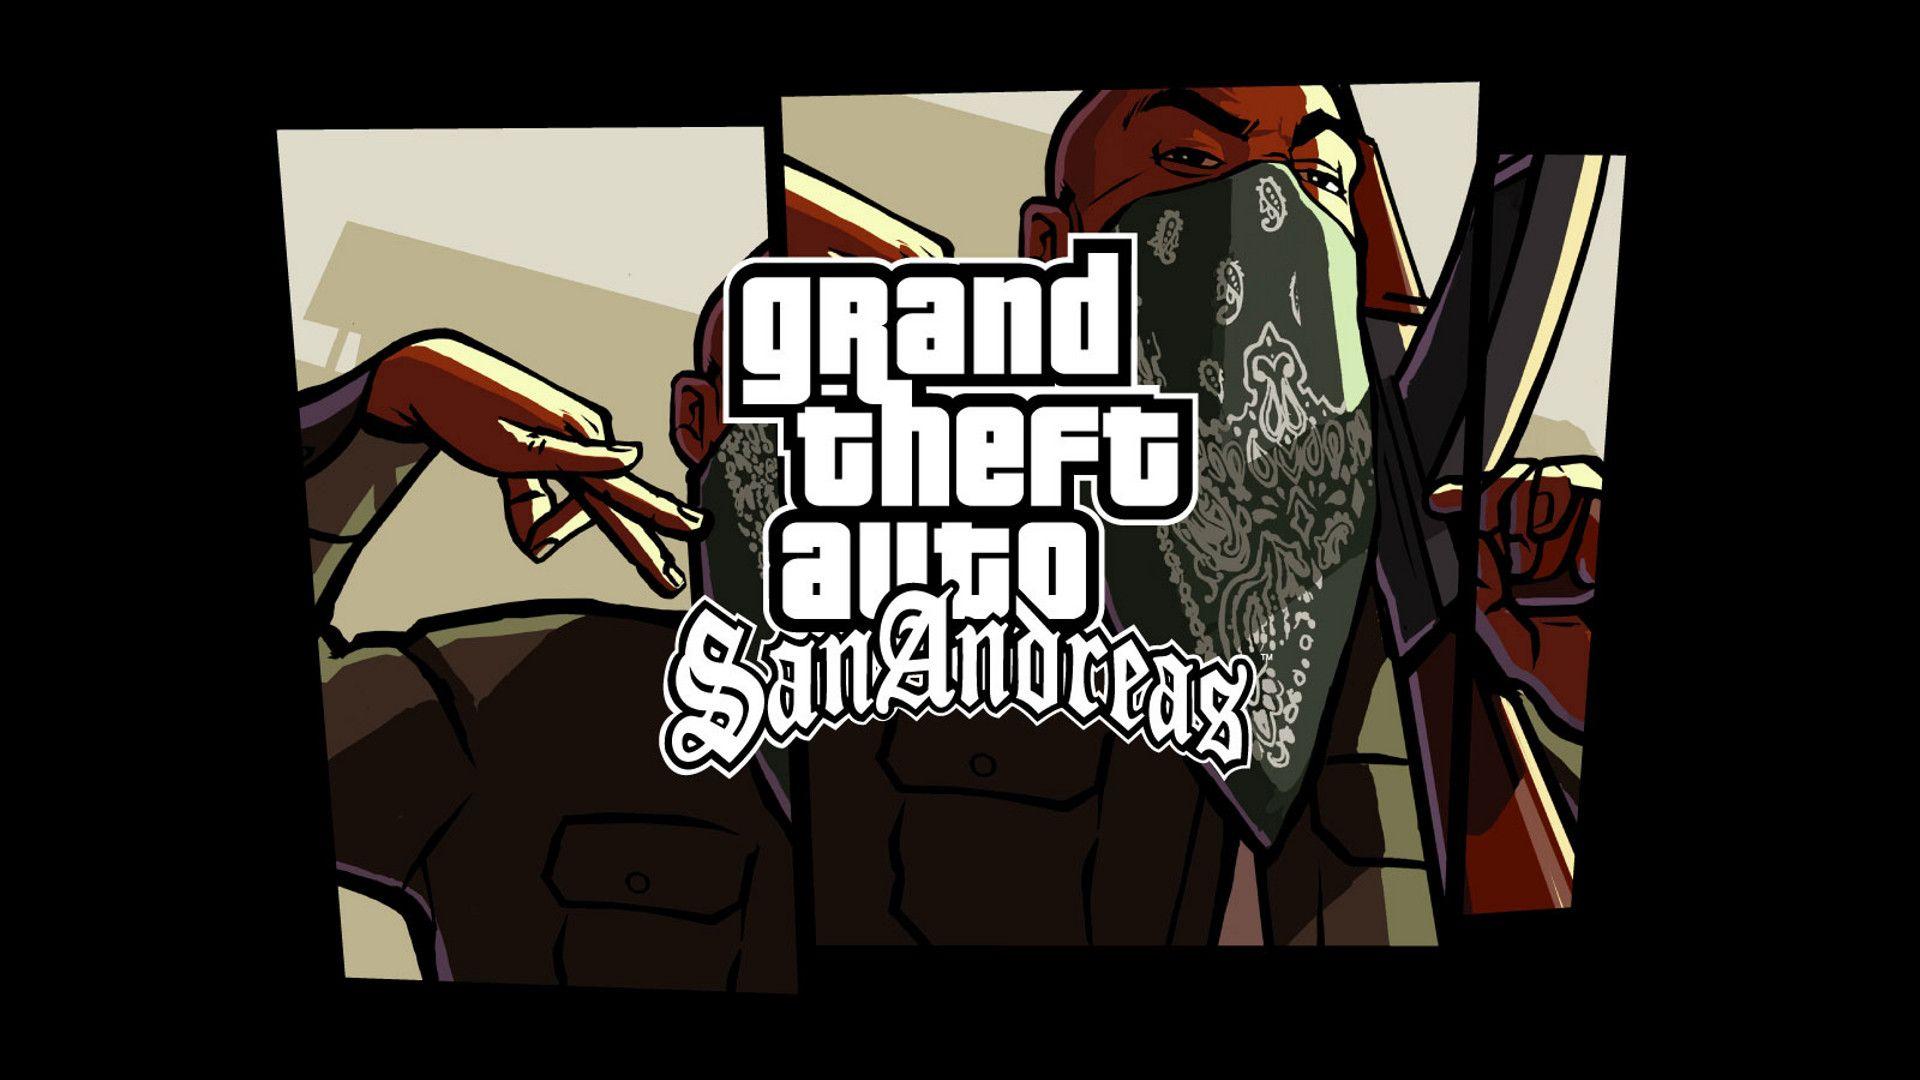 Grand Theft Auto San Andreas wallpapers